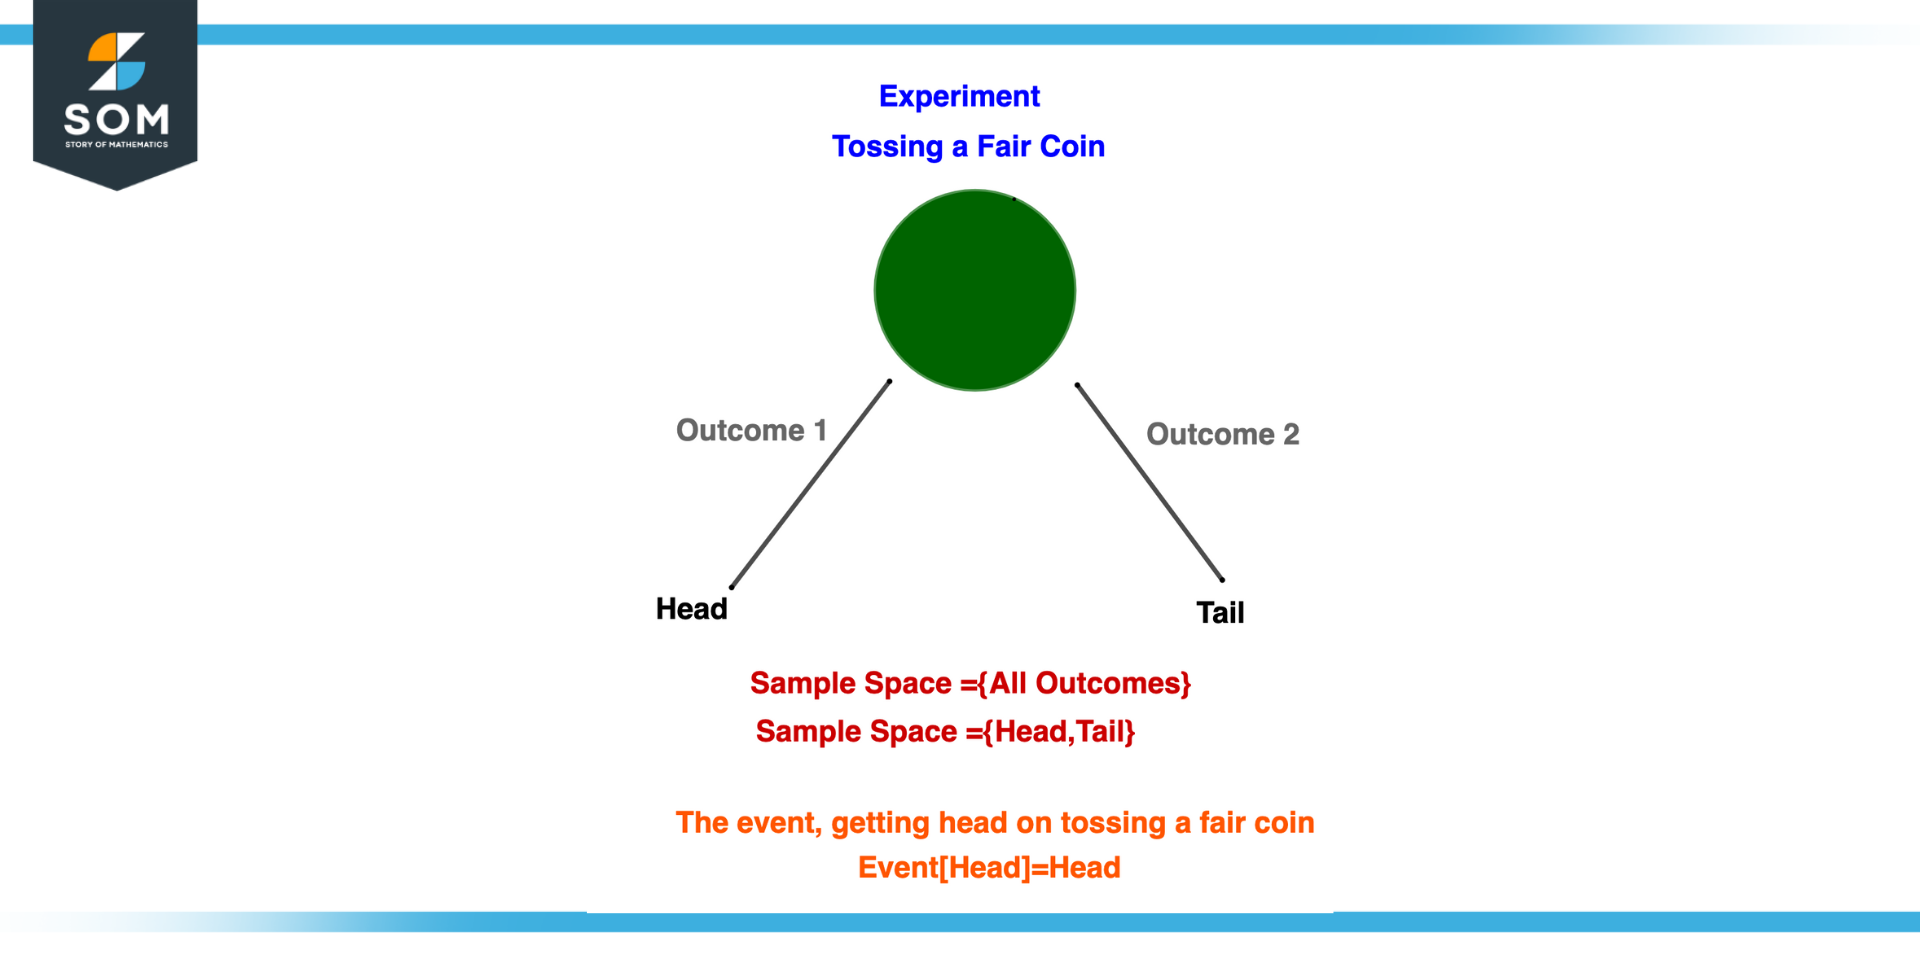 Conceptual Overview of Outcome of Experiment